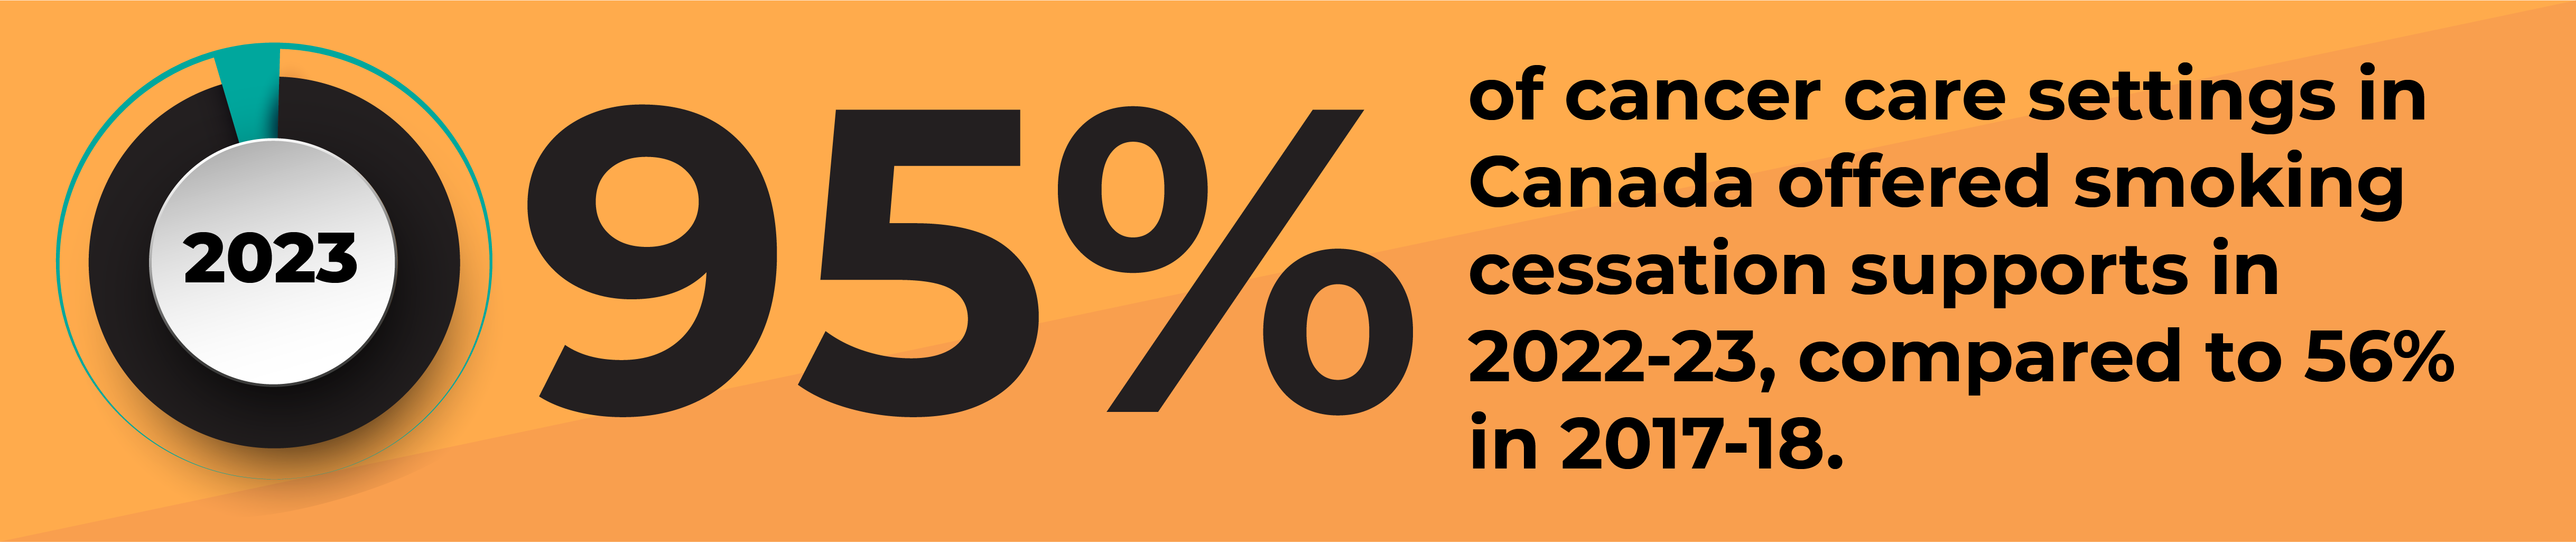 95% of cancer care settings in Canada offered smoking cessation supports in 2022-23, compared to 56% in 2017-18.